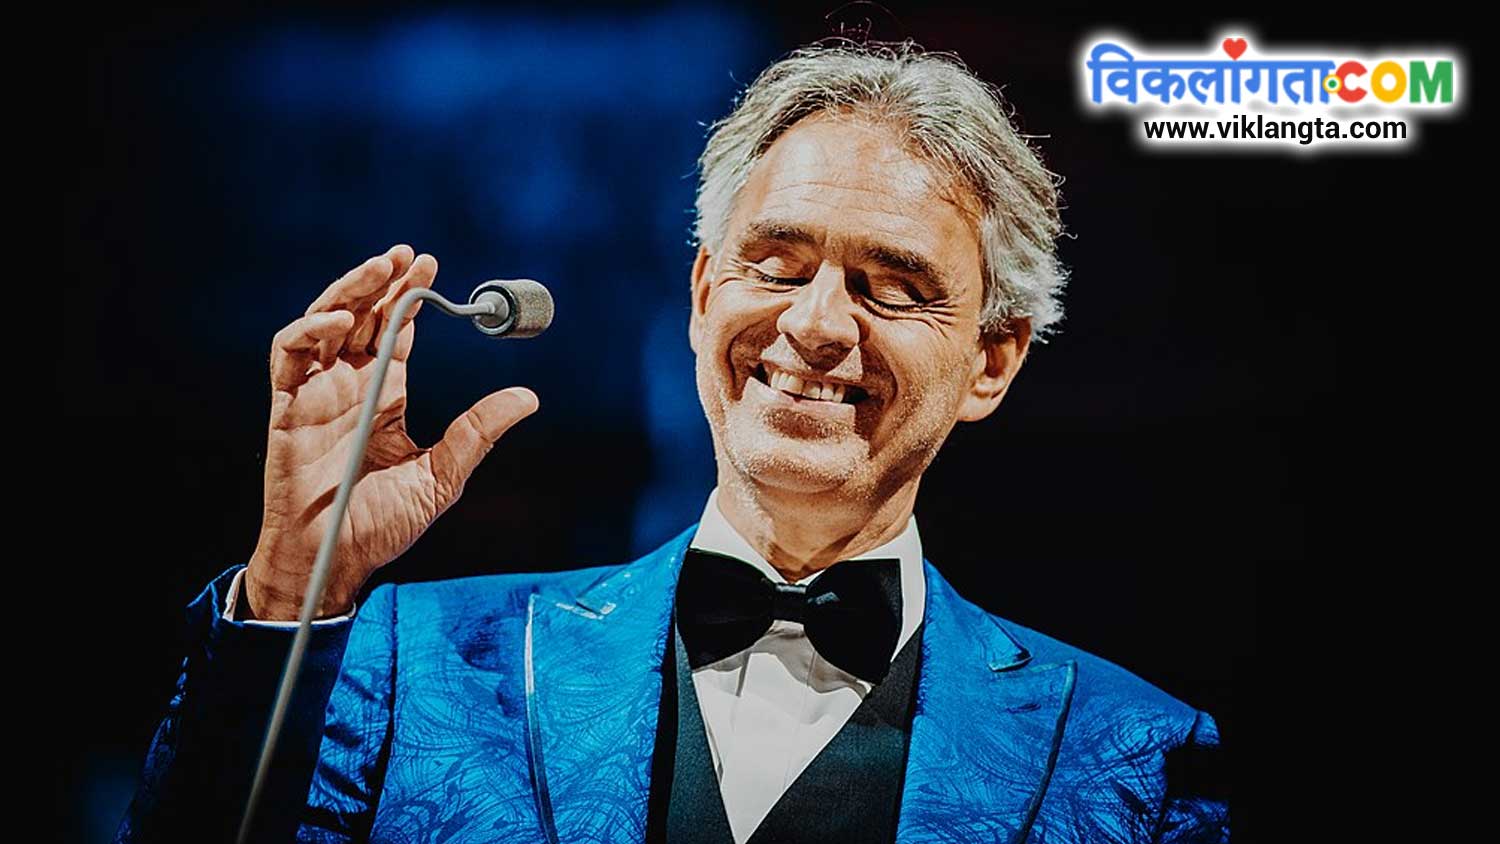 famous disabled person in the world Andrea Bocelli